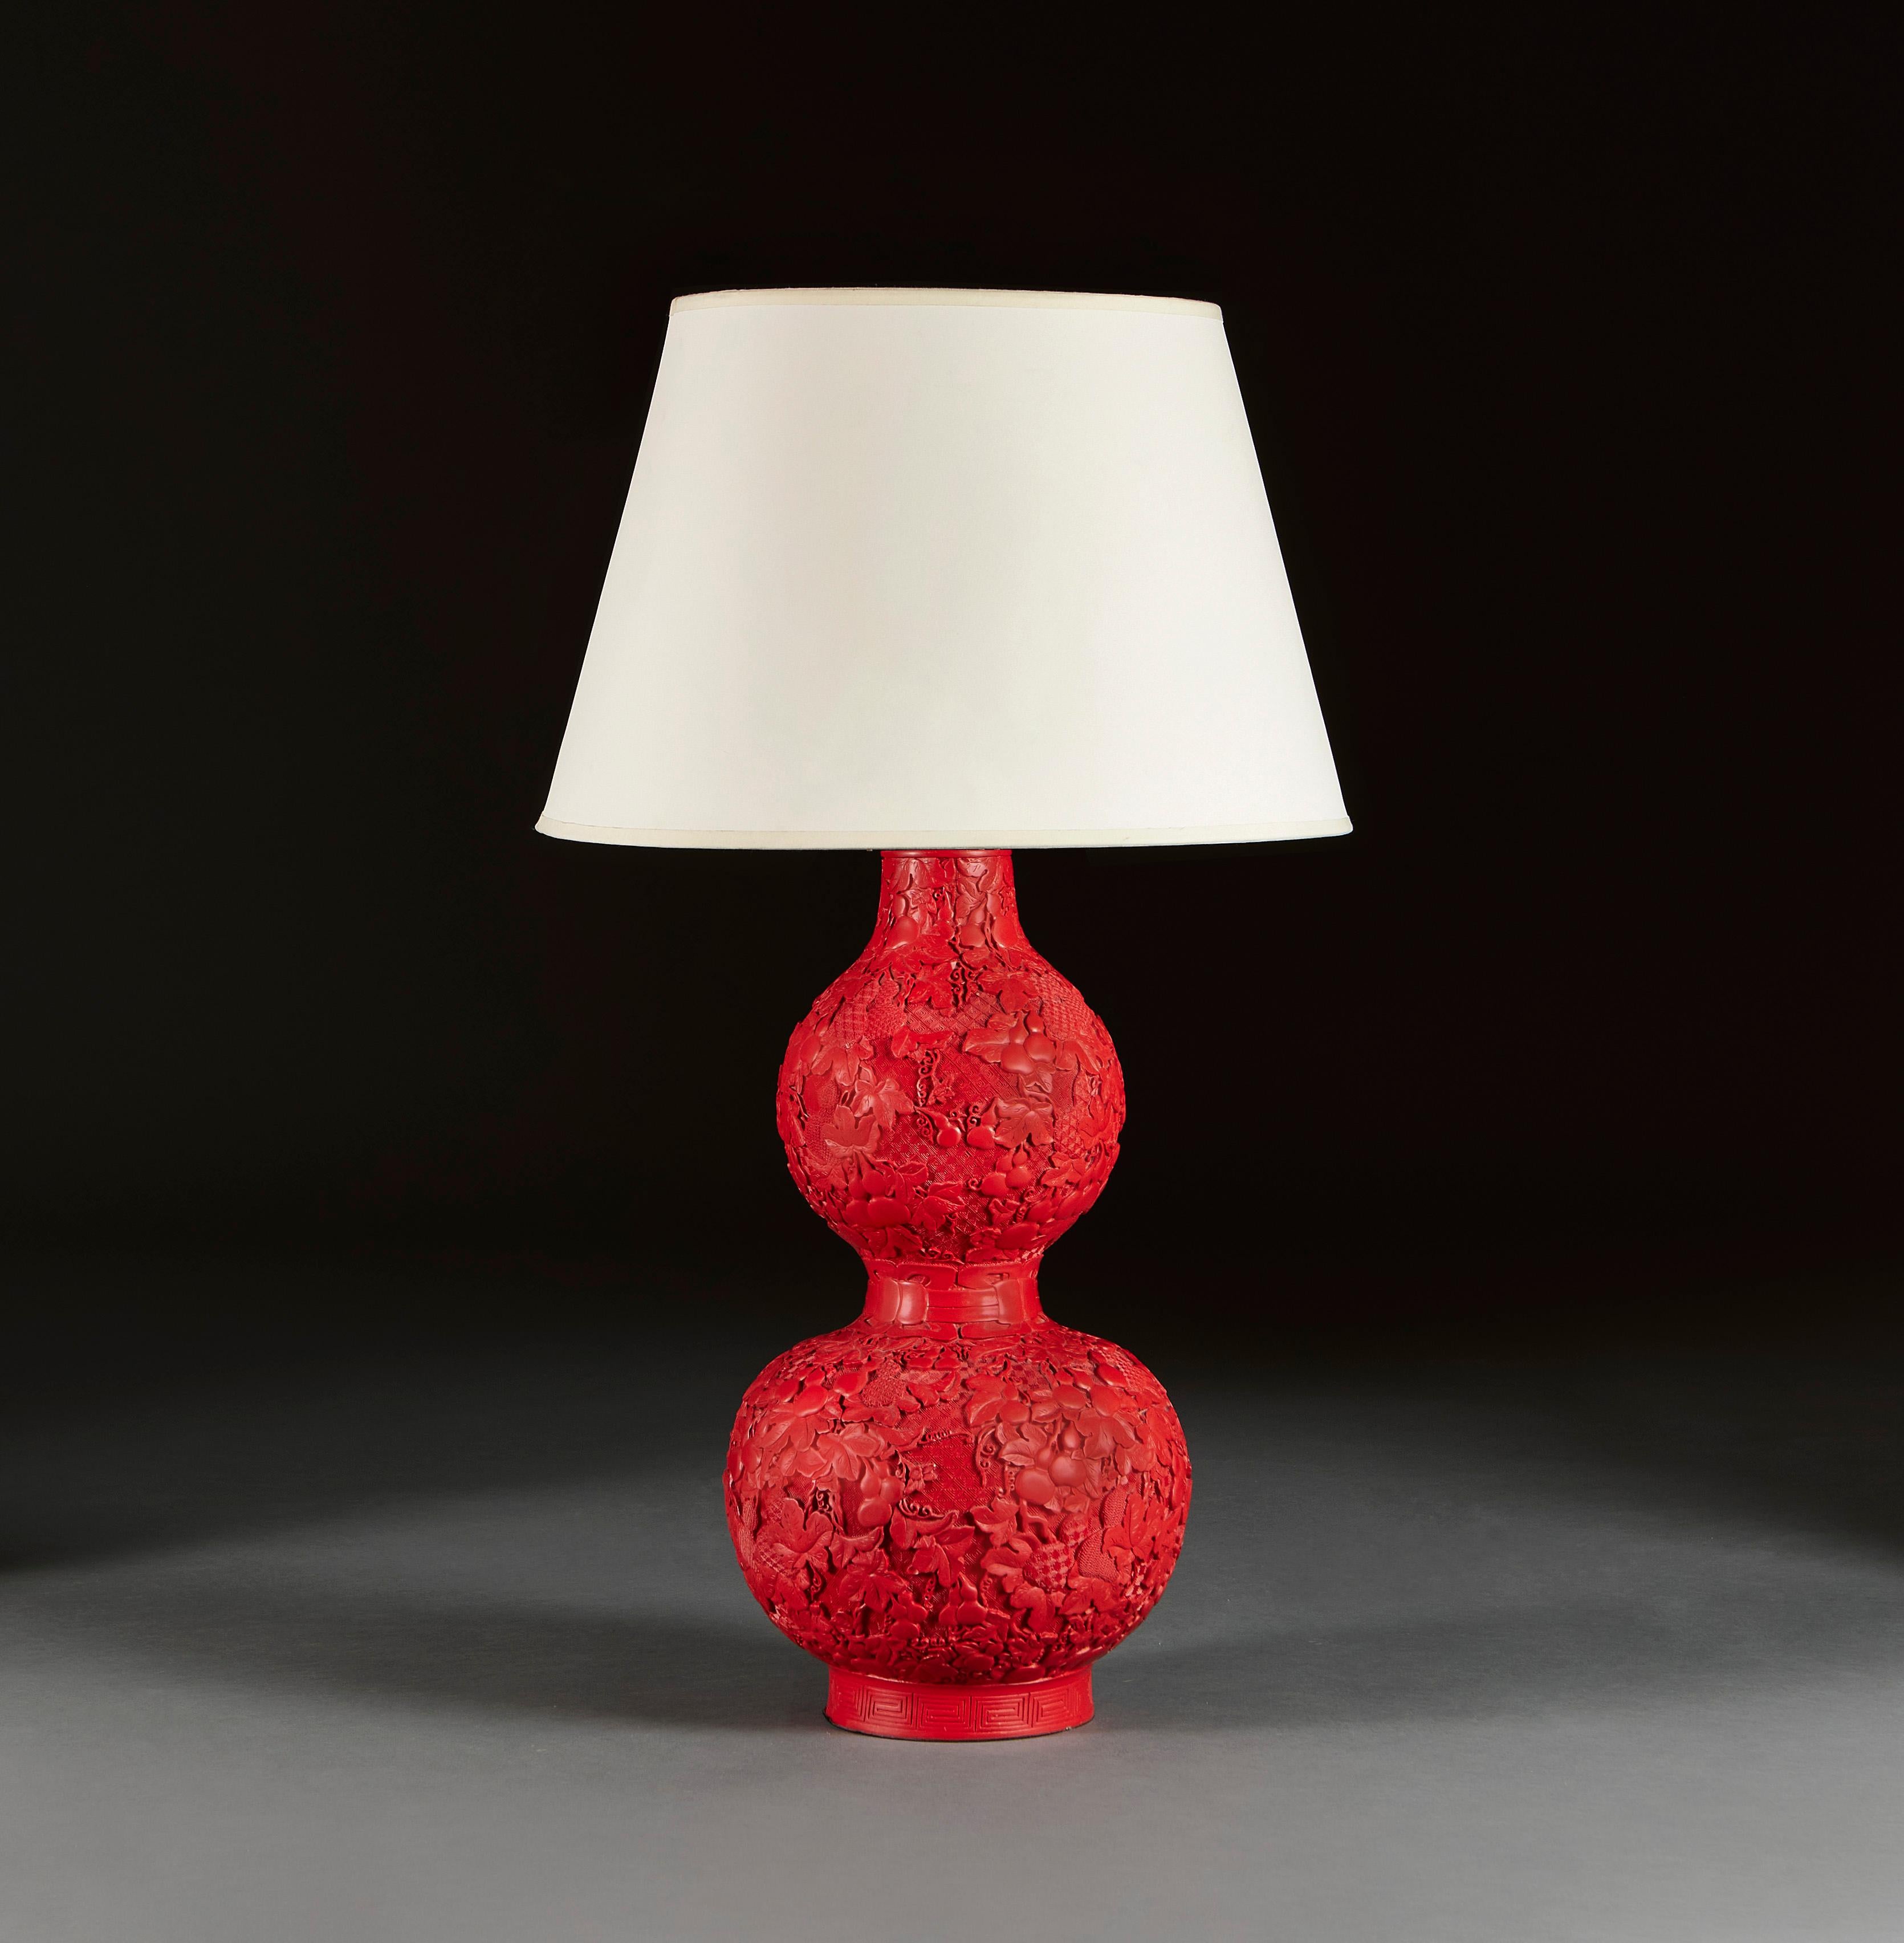 China, circa 1900

A large cinnabar lacquer vase in crimson red of double gourd form, with carvings of gourds and vine leaves, overlaid on a geometric cross hatched ground, now converted as a lamp.

Height of vase 50cm
Height with shade 79cm